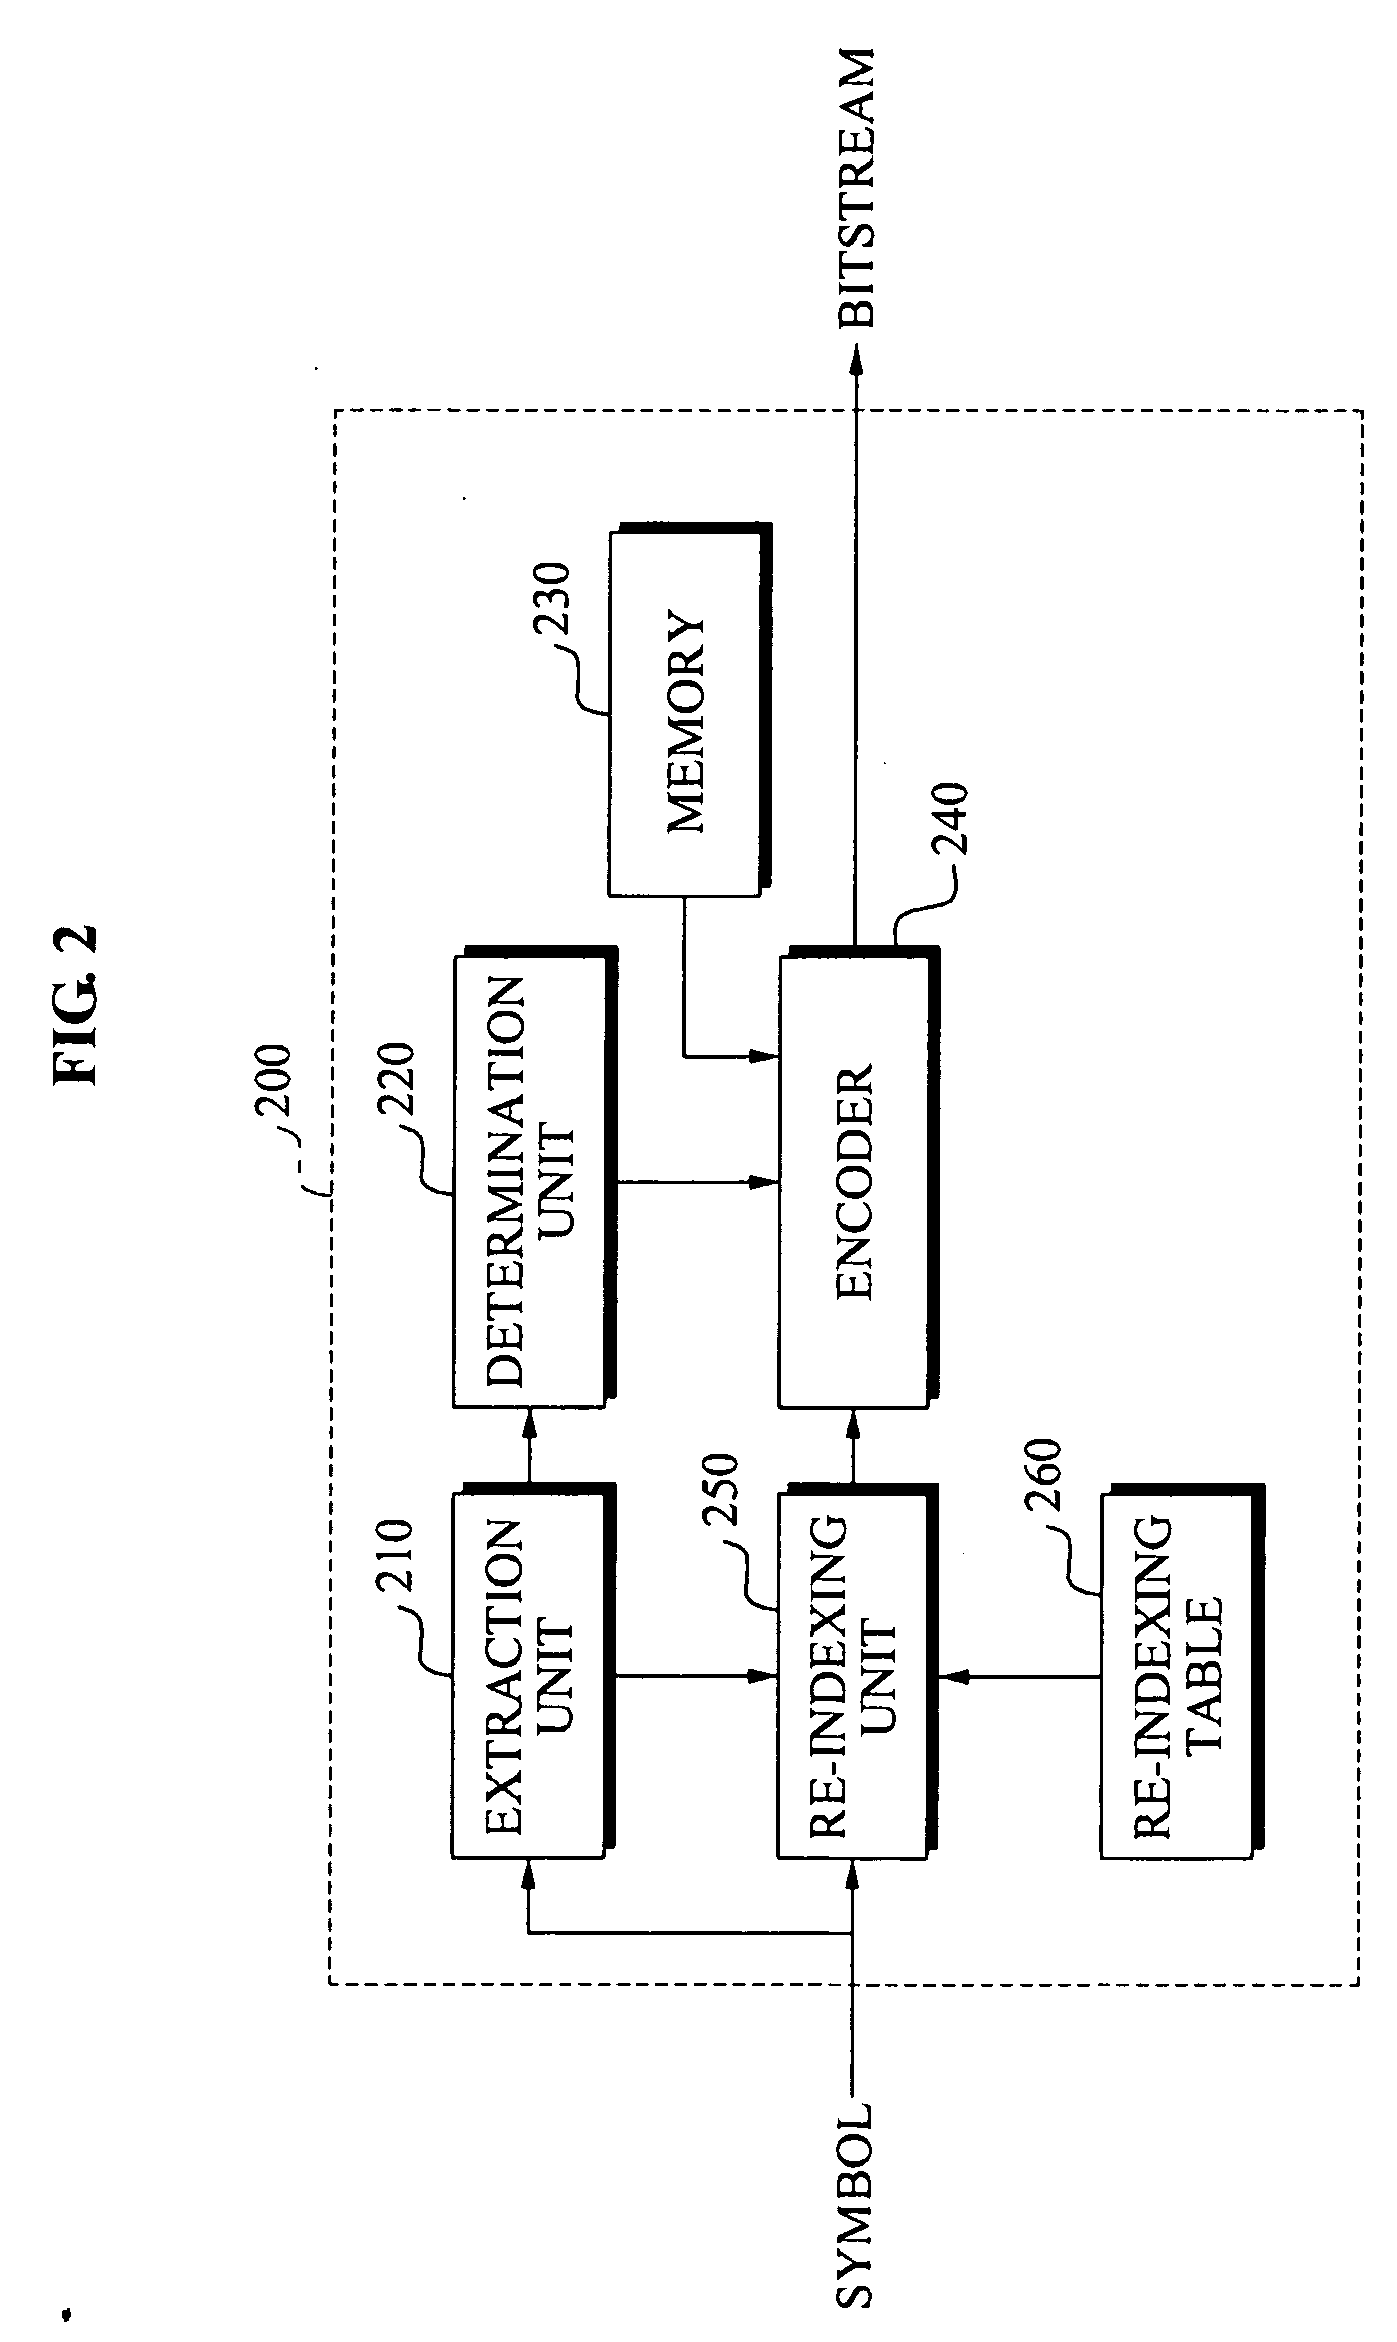 Apparatus and method for lossless coding and decoding